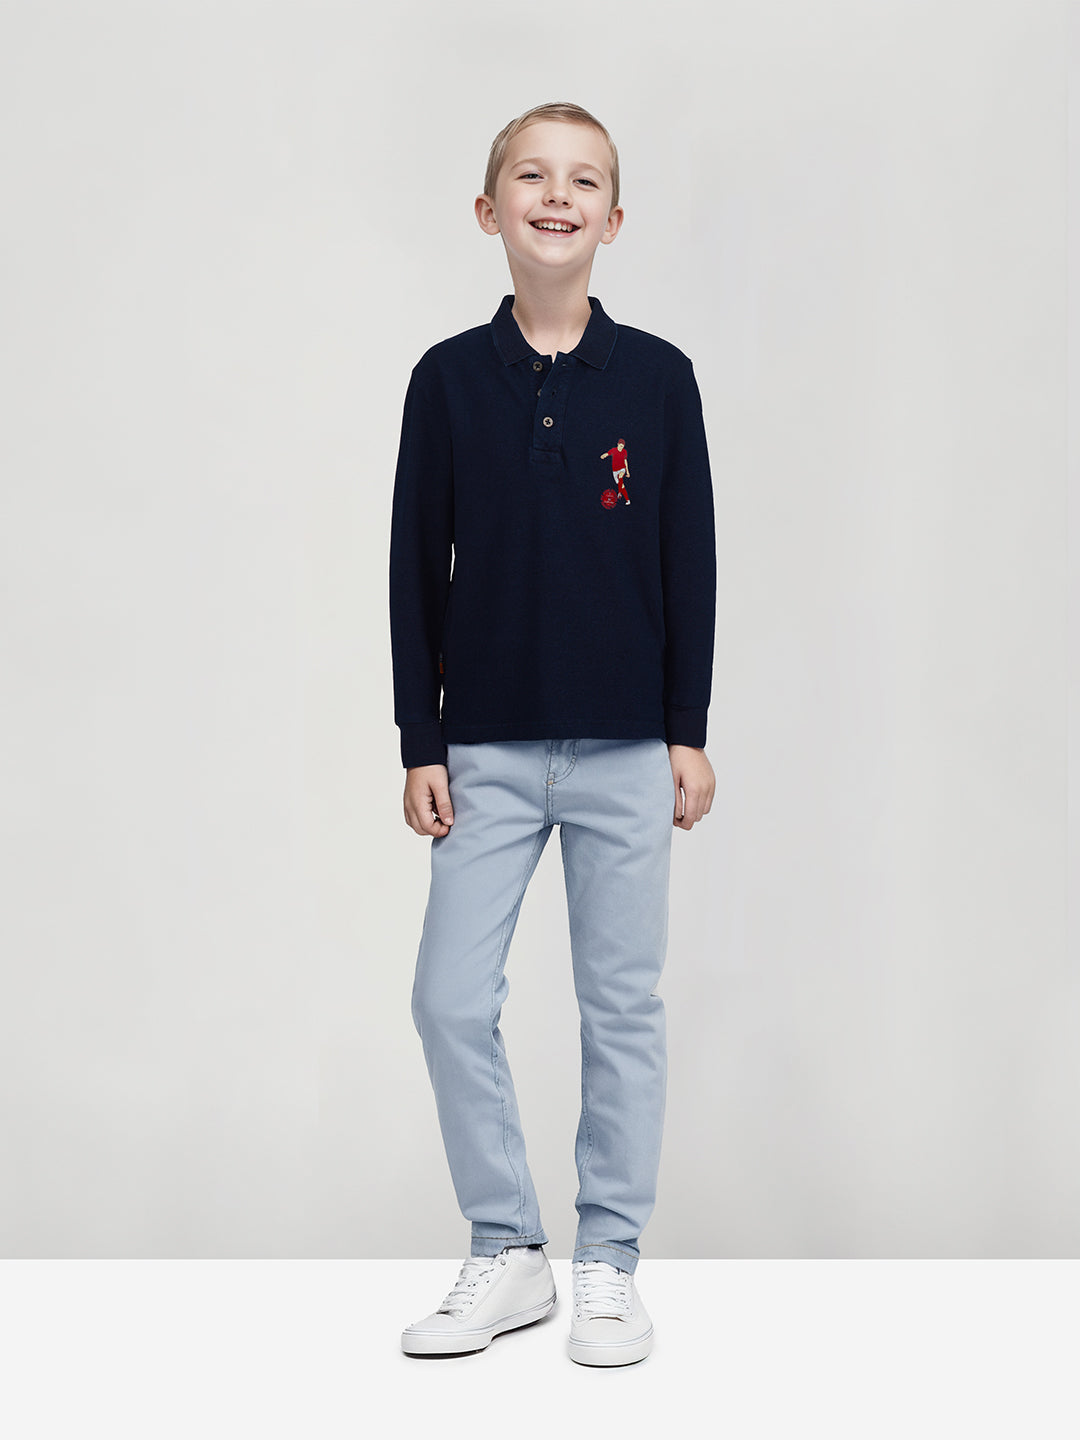 Boys Navy Blue Solid knitted polo t-shirt